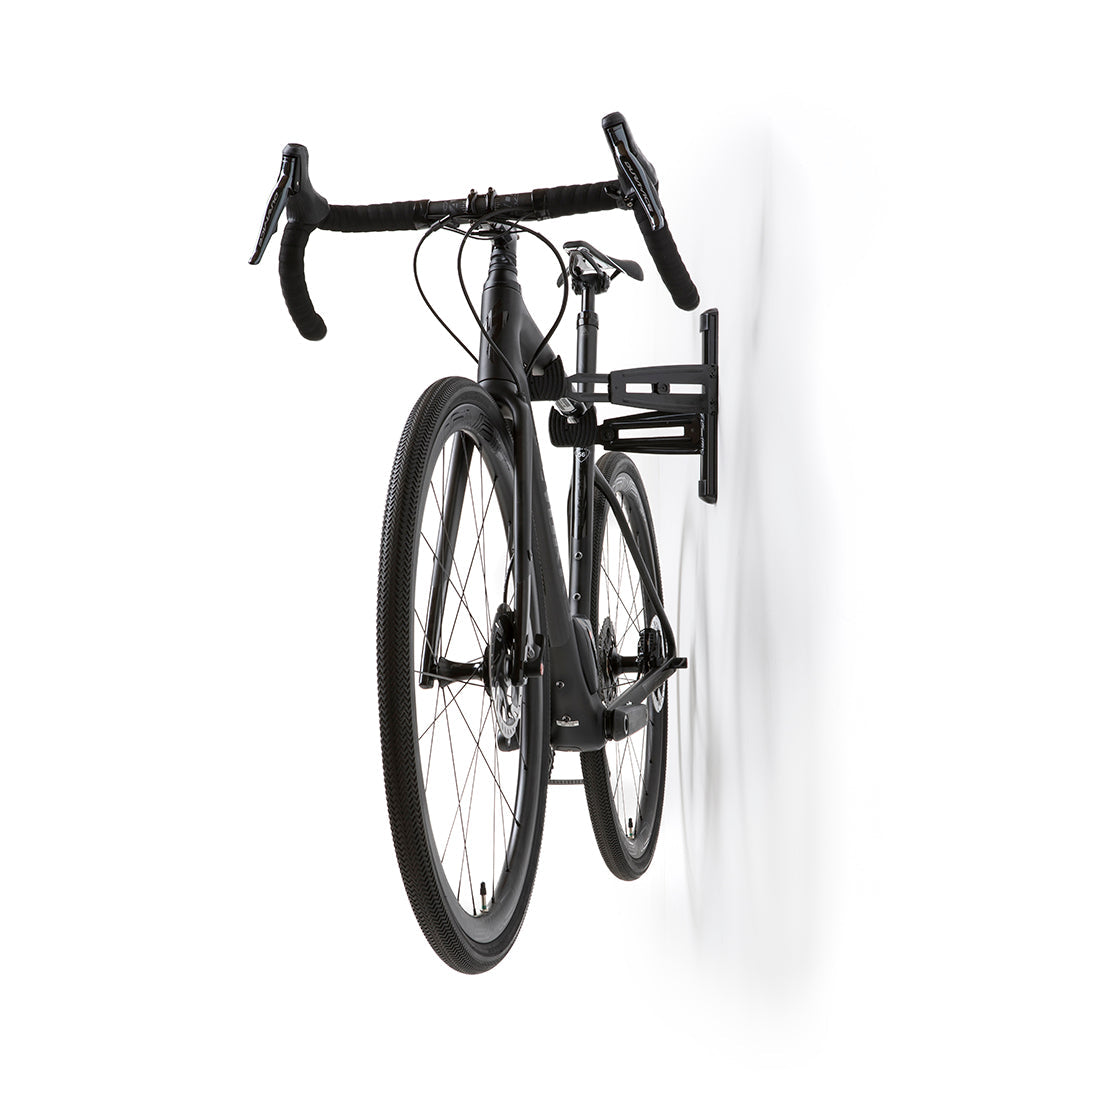 Black road bike viewed from head-on, suspended on wall mounted bike storage cradle arms.